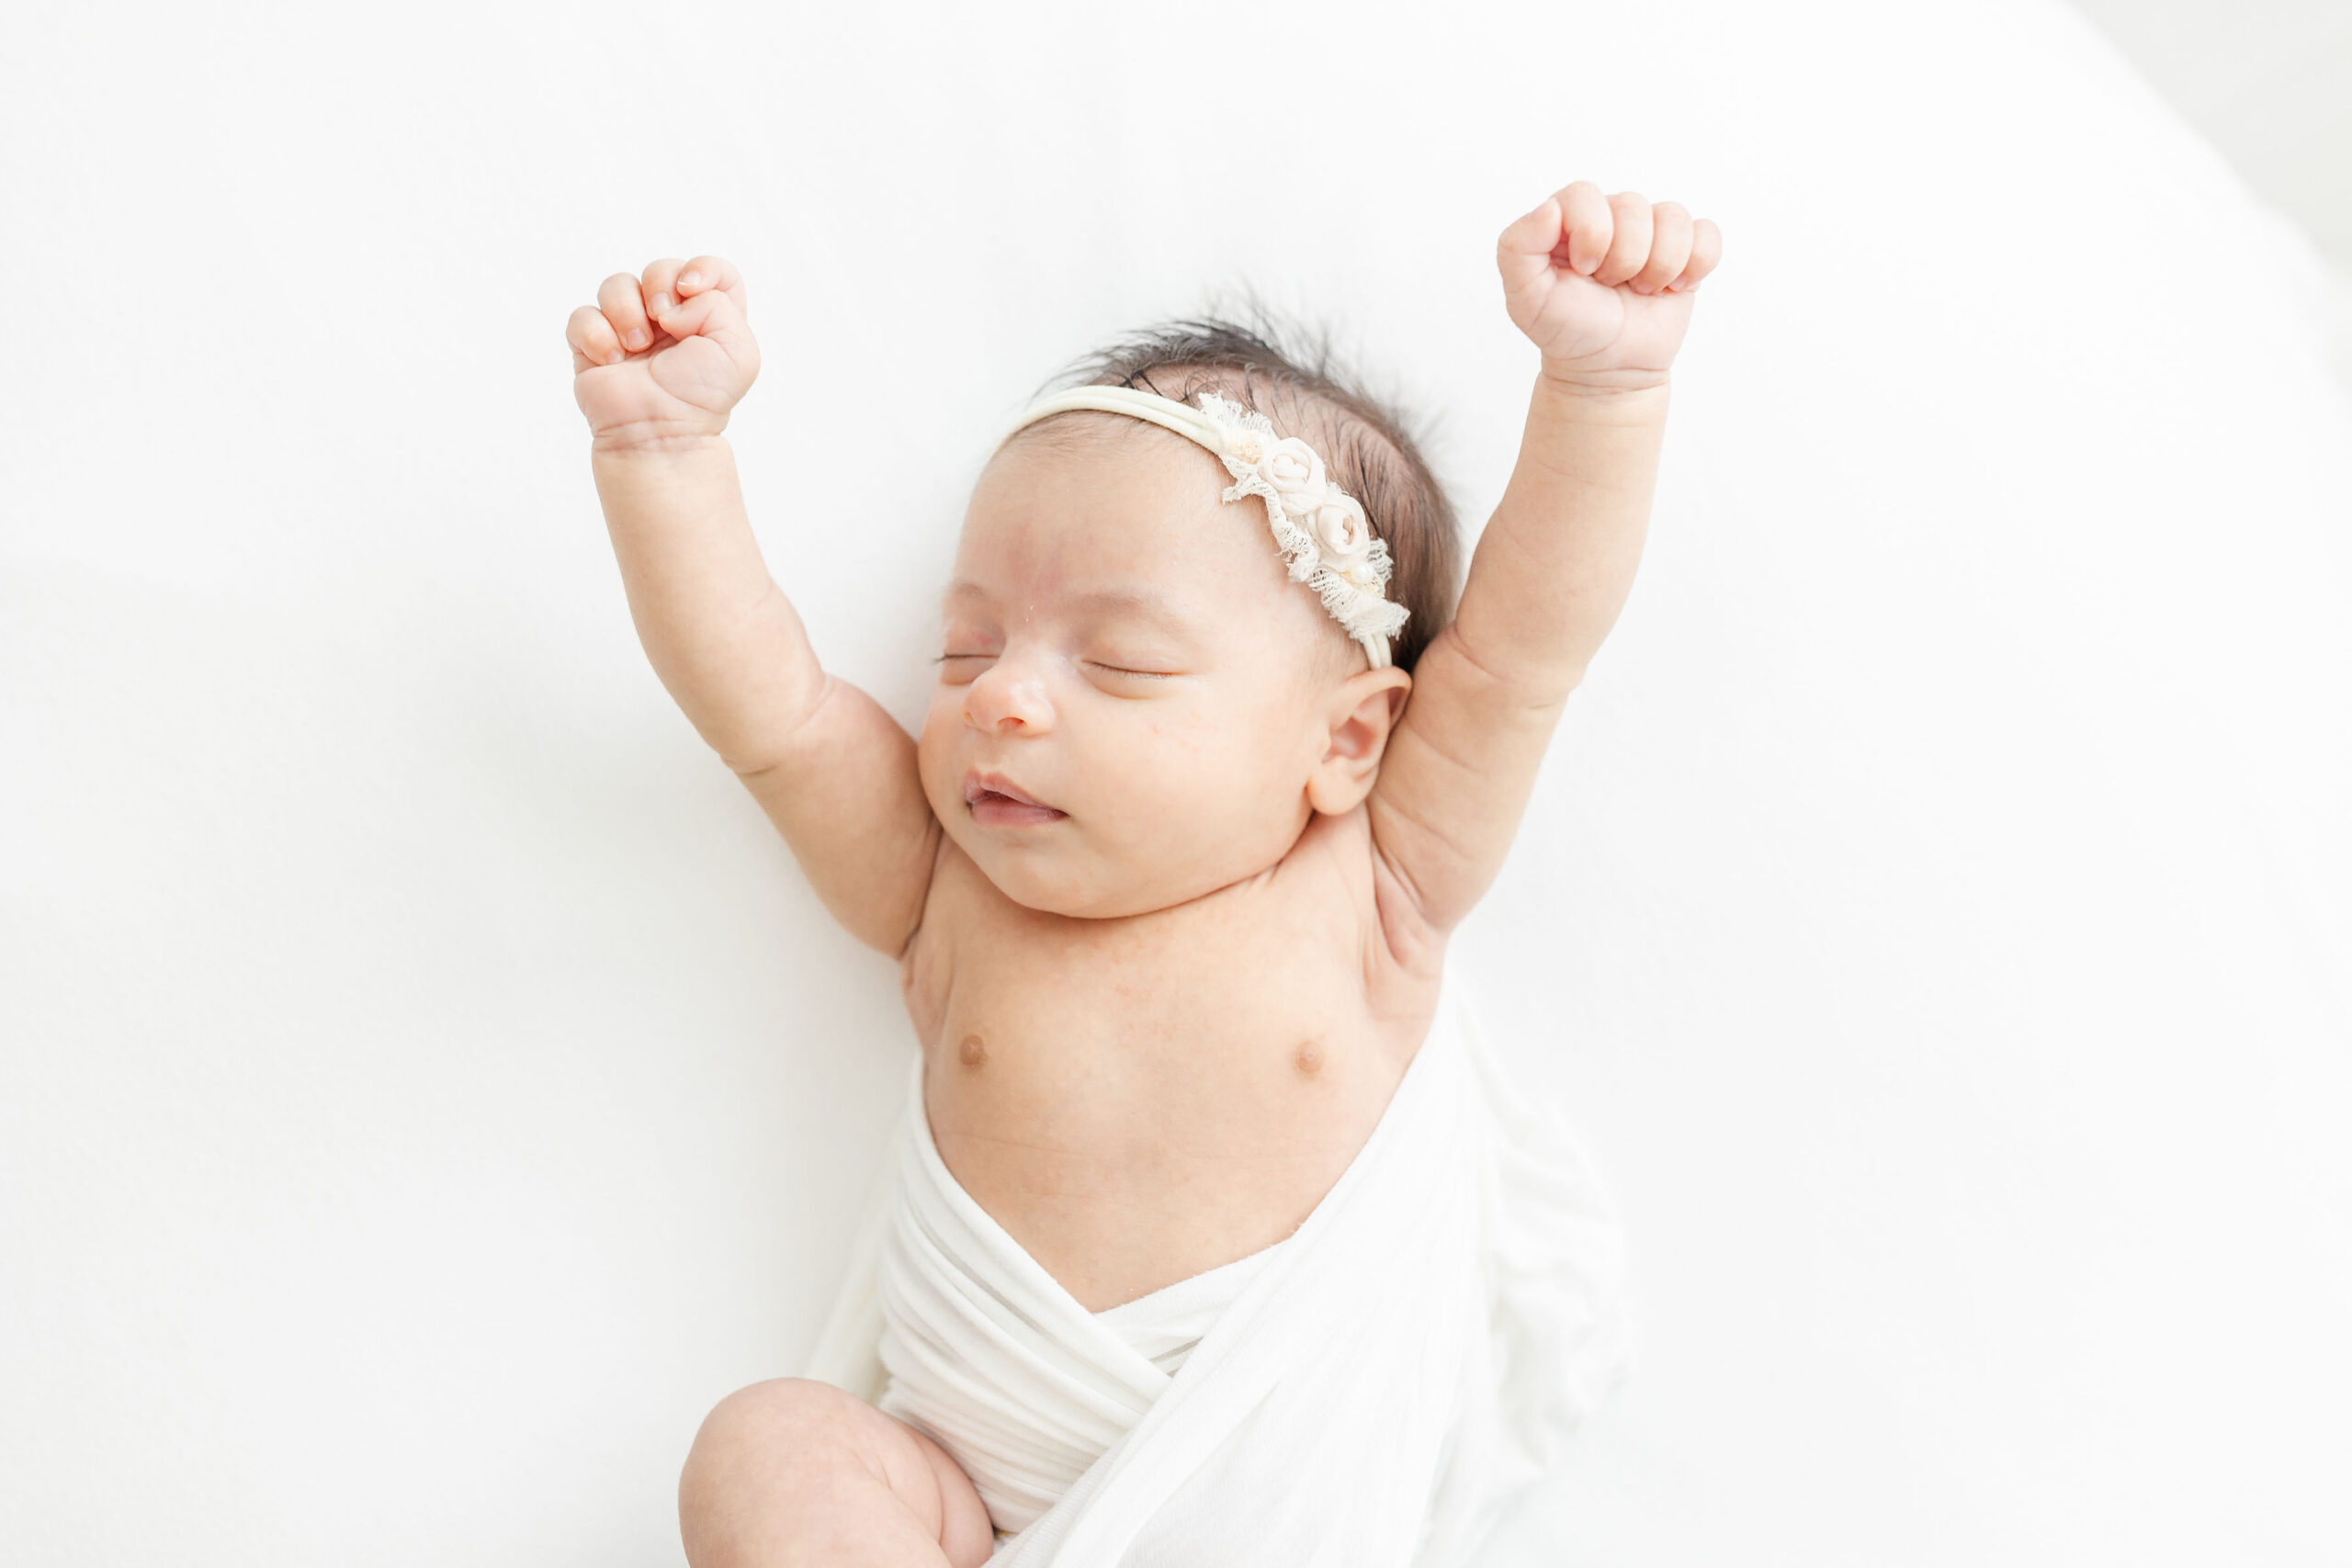 A newborn baby stretches out its arms while sleeping in a white swaddle natural birth choices